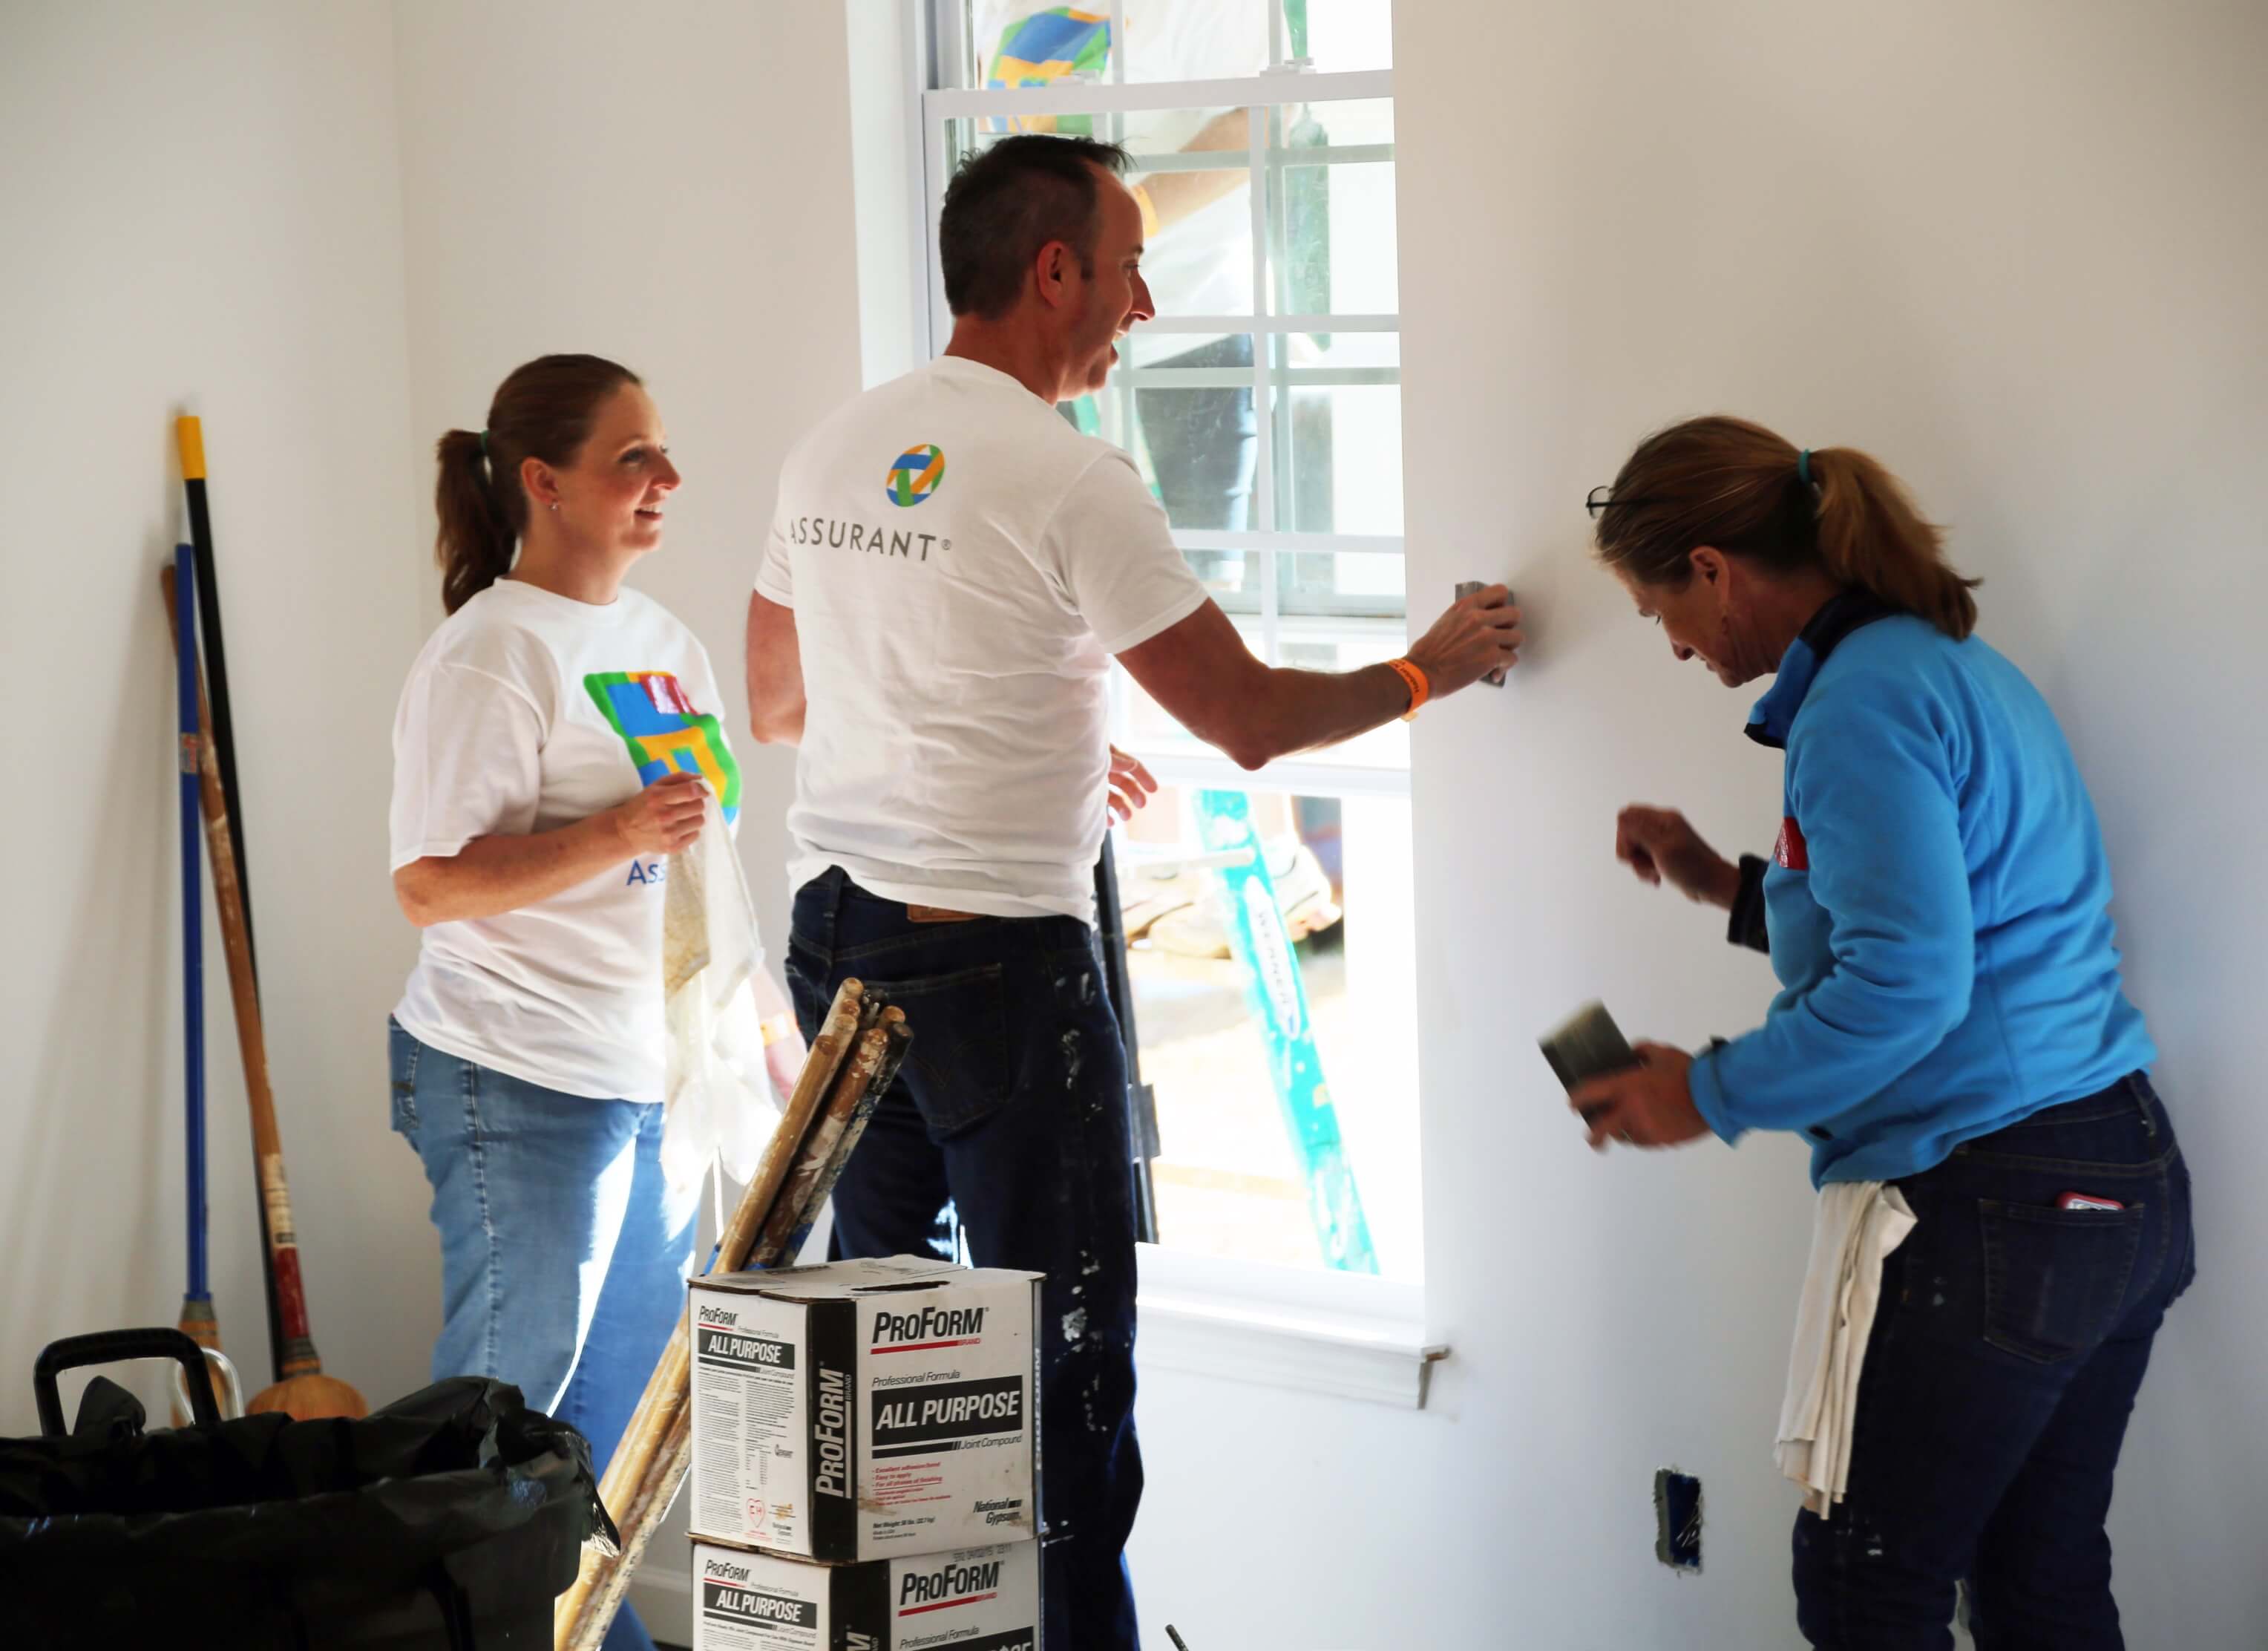 Assurant cares and team member work together to build homes for others